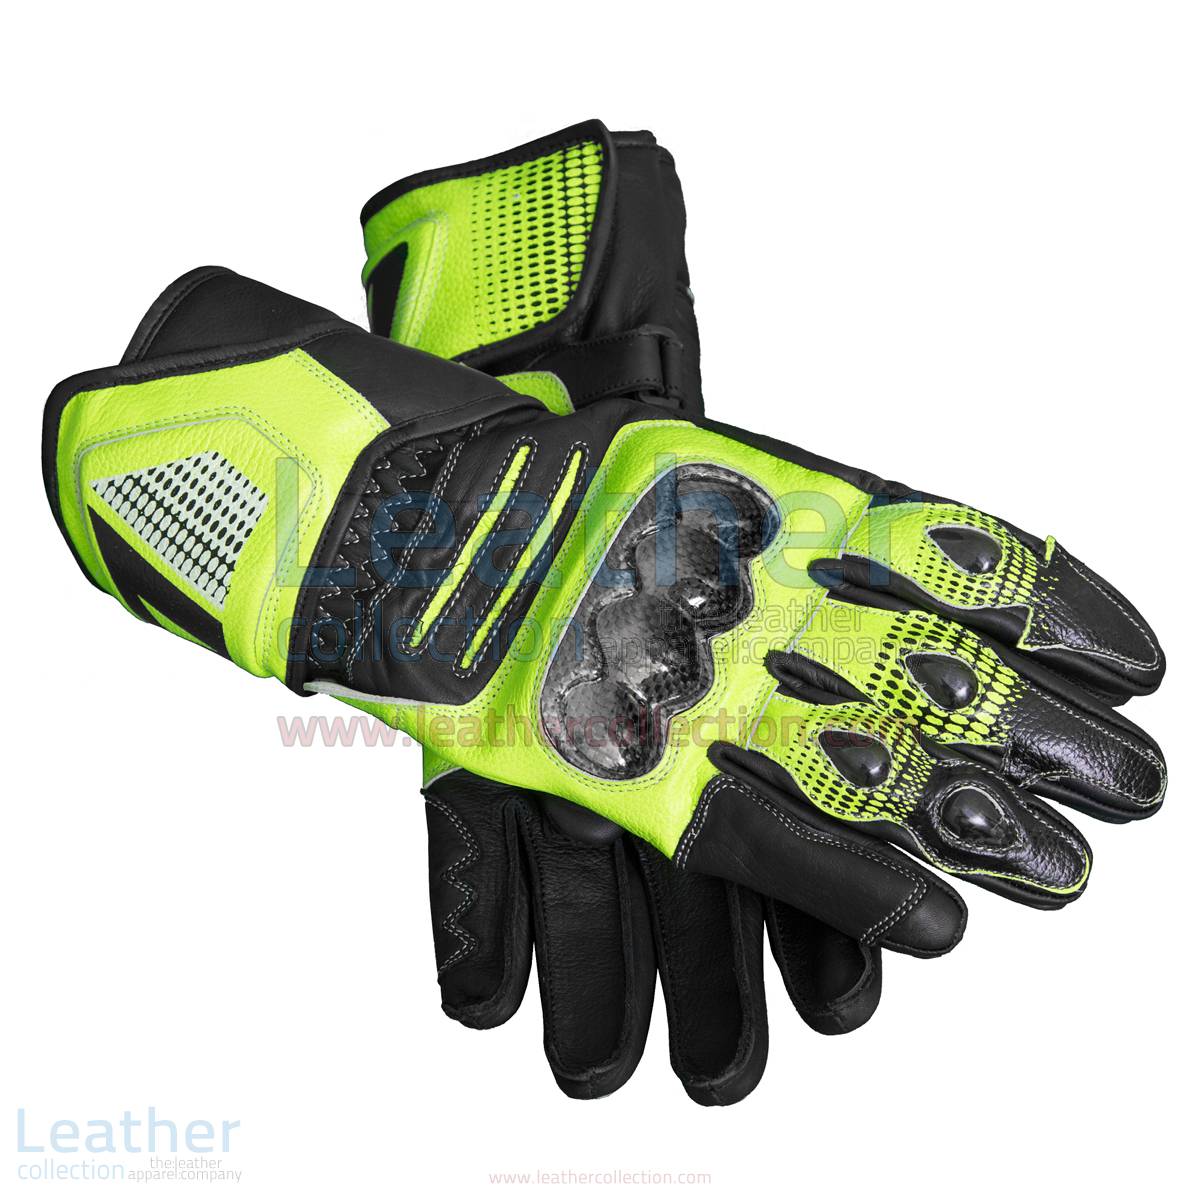 Valentino Rossi Motorcycle Race Gloves